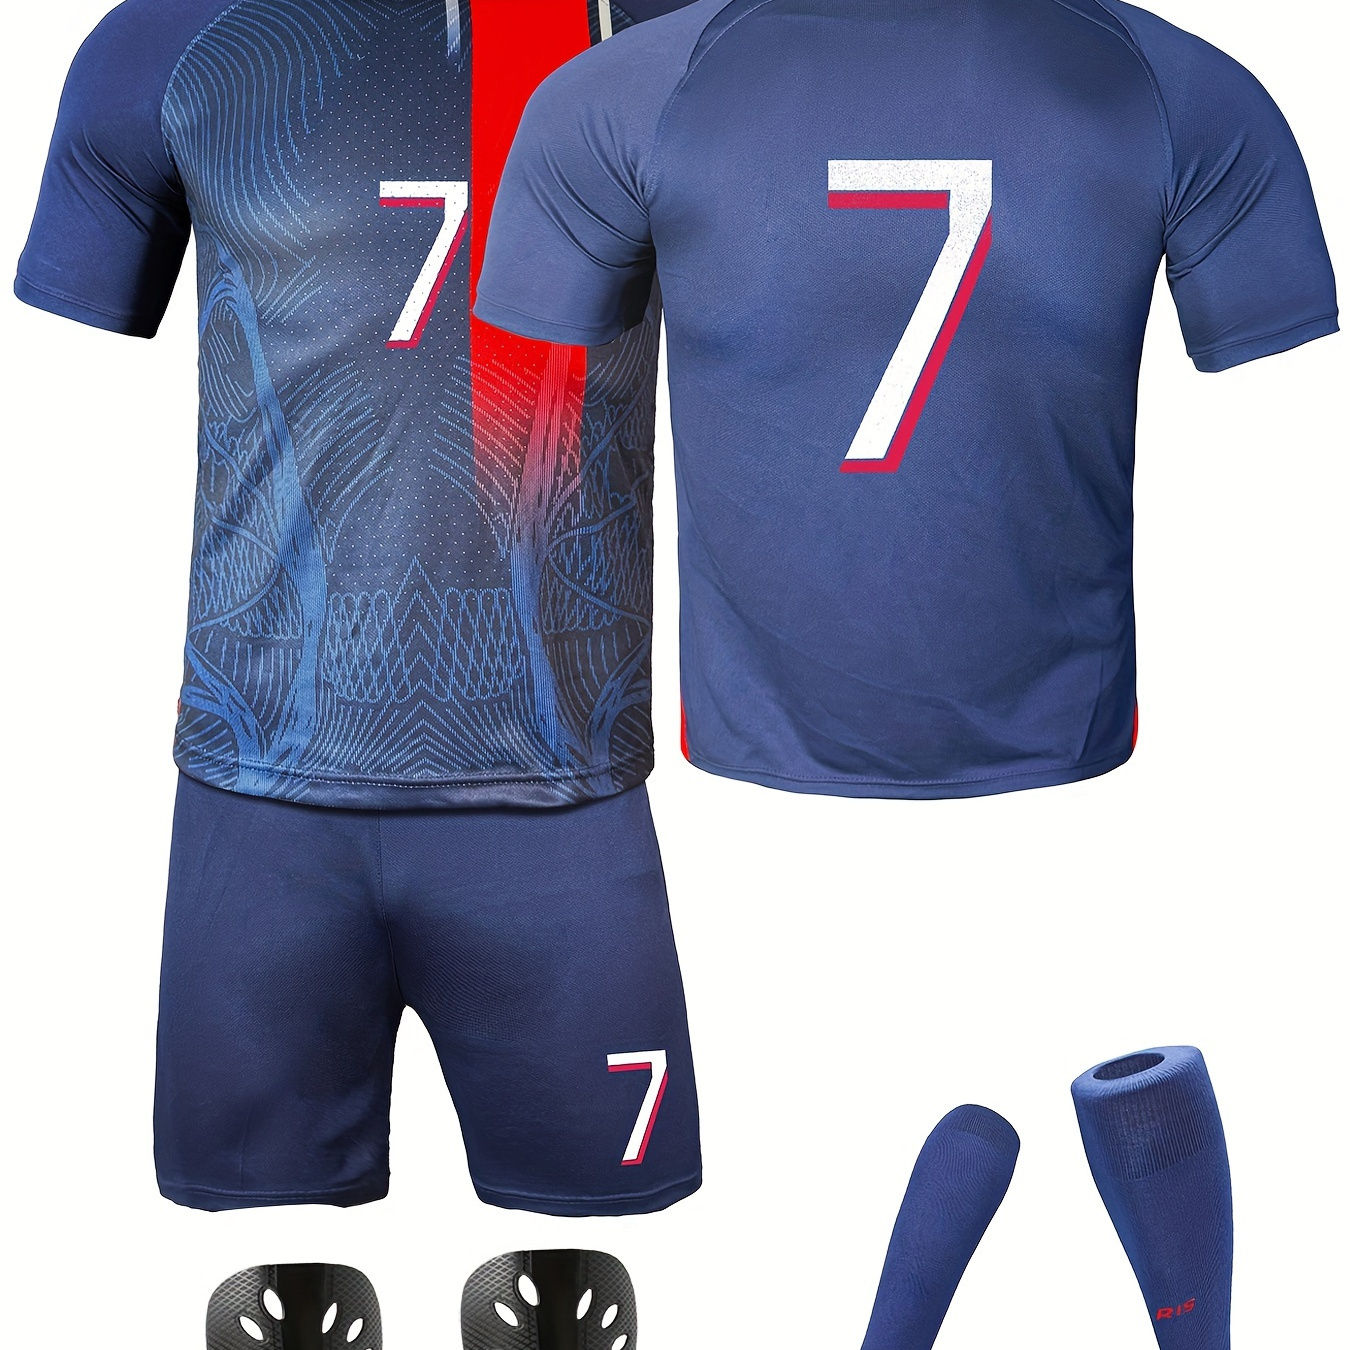 

Boys Breathable Sports Football Jersey Set, Quick-drying Short Sleeve T-shirt&shorts&knee Pads&socks, Boys Clothing For Summer